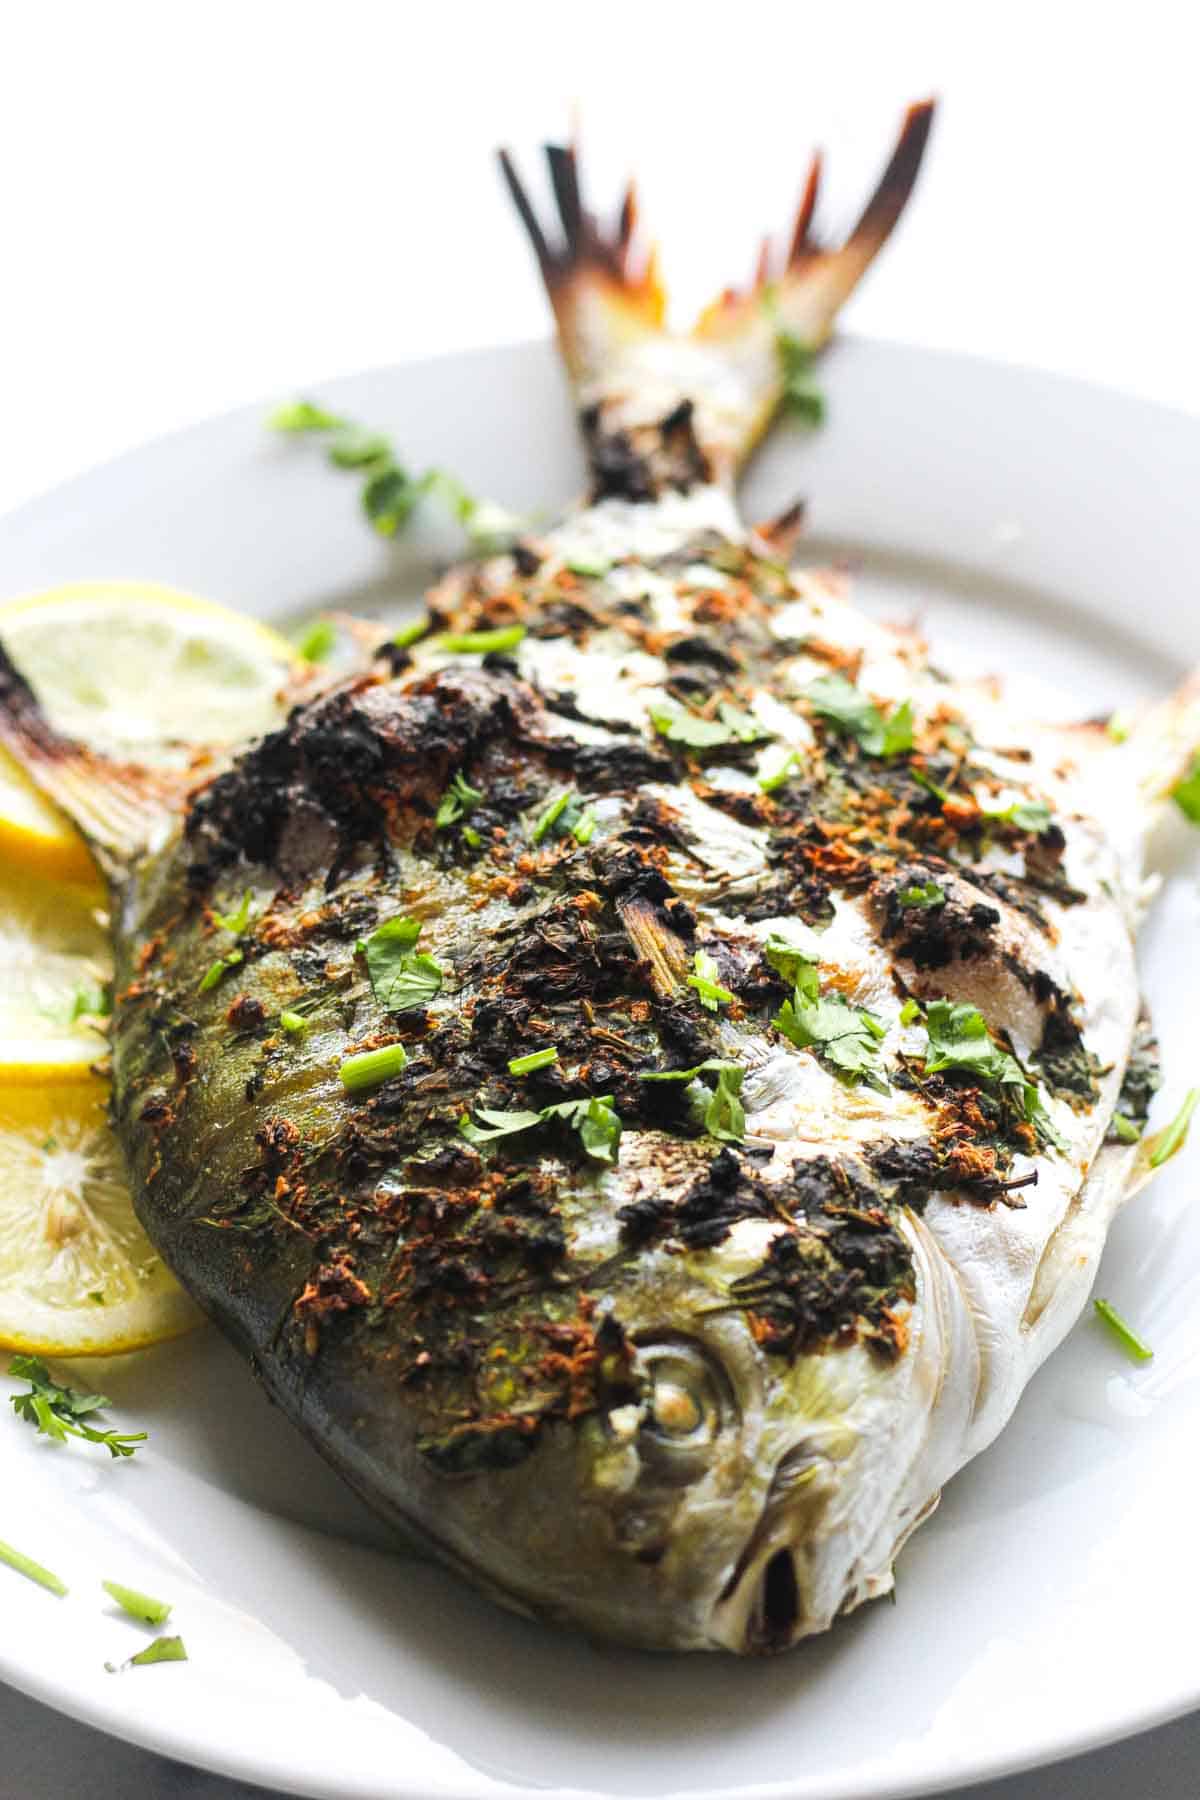 Whole baked pompano with lemon ginger sauce - The Top Meal